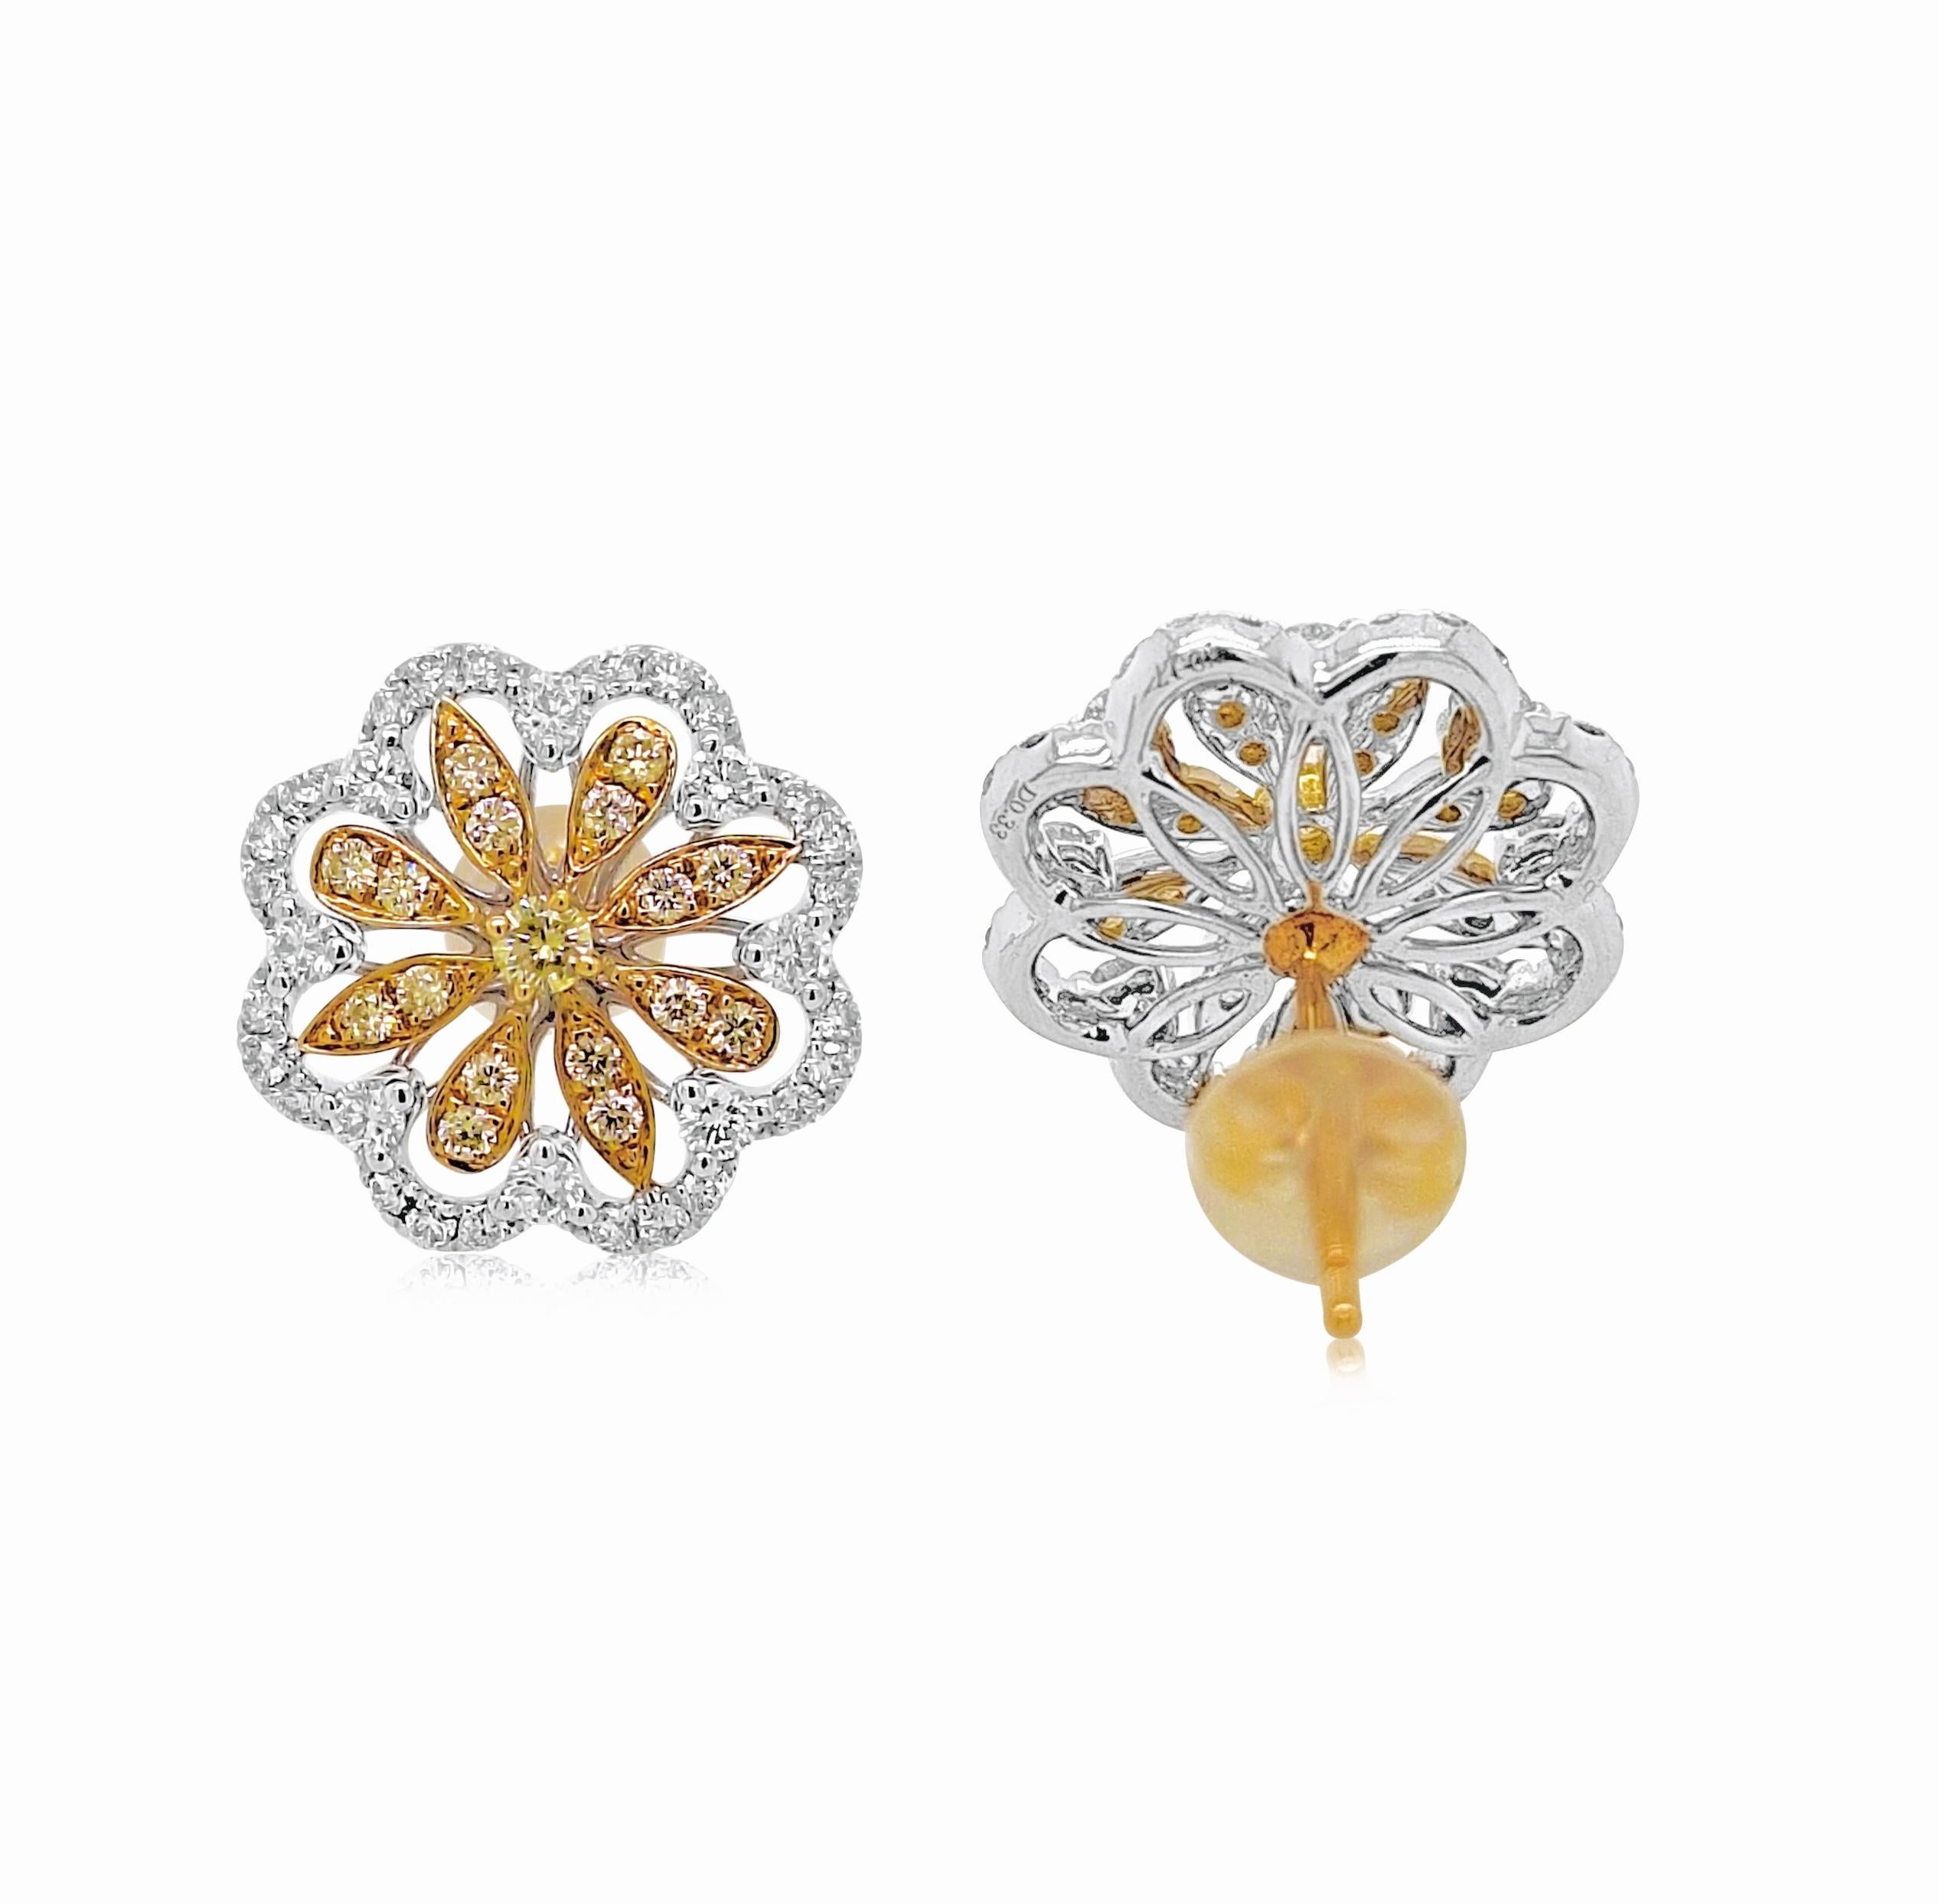 Contemporary Yellow Diamond and White Diamond Floral Designer Earrings made in Gold, Platinum For Sale